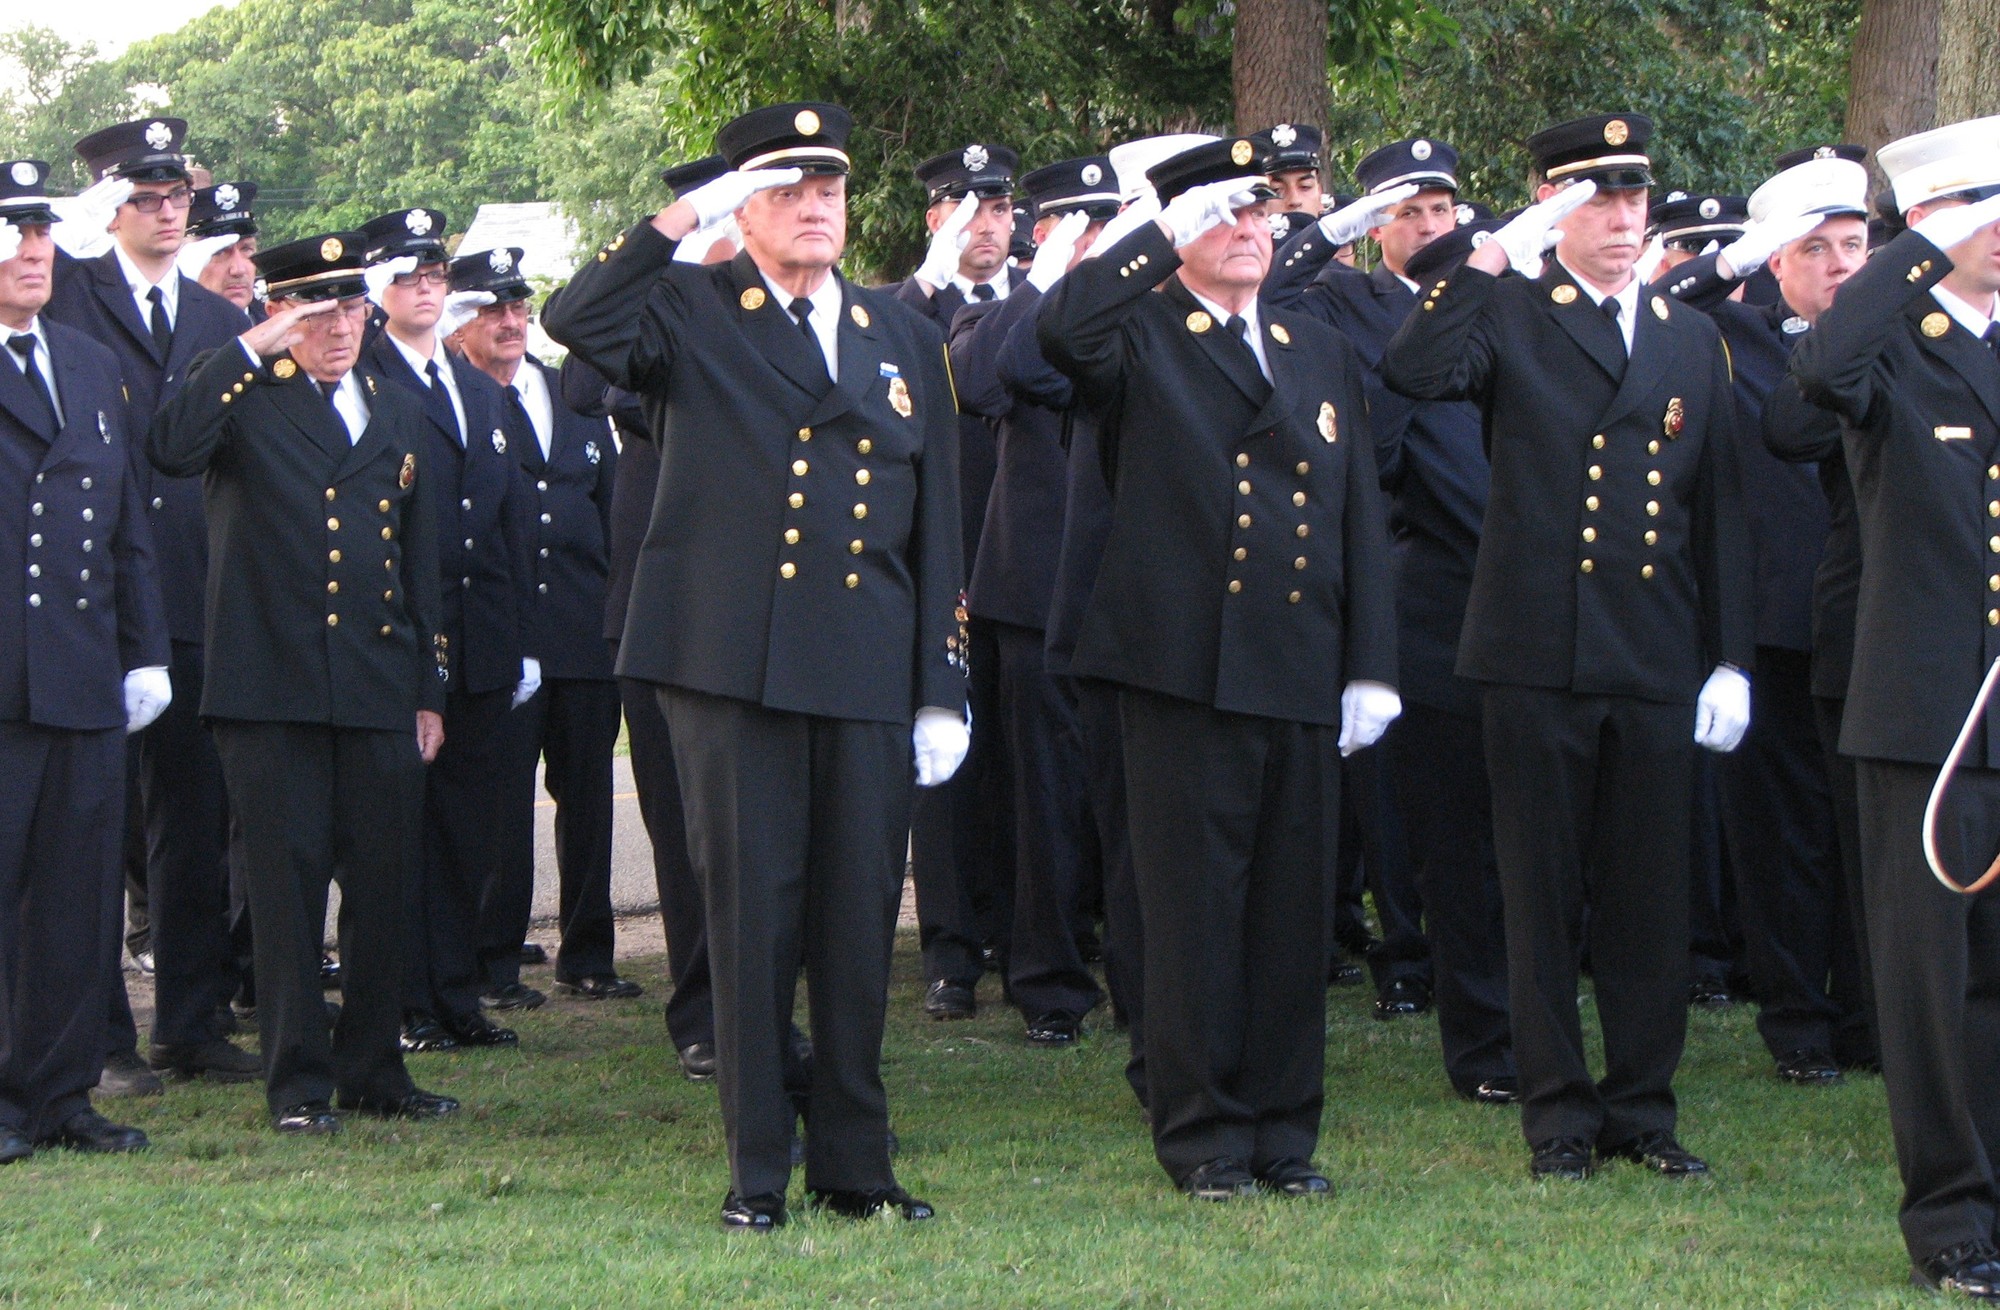 Members of the Valley Stream Fire Department salute during the ceremony